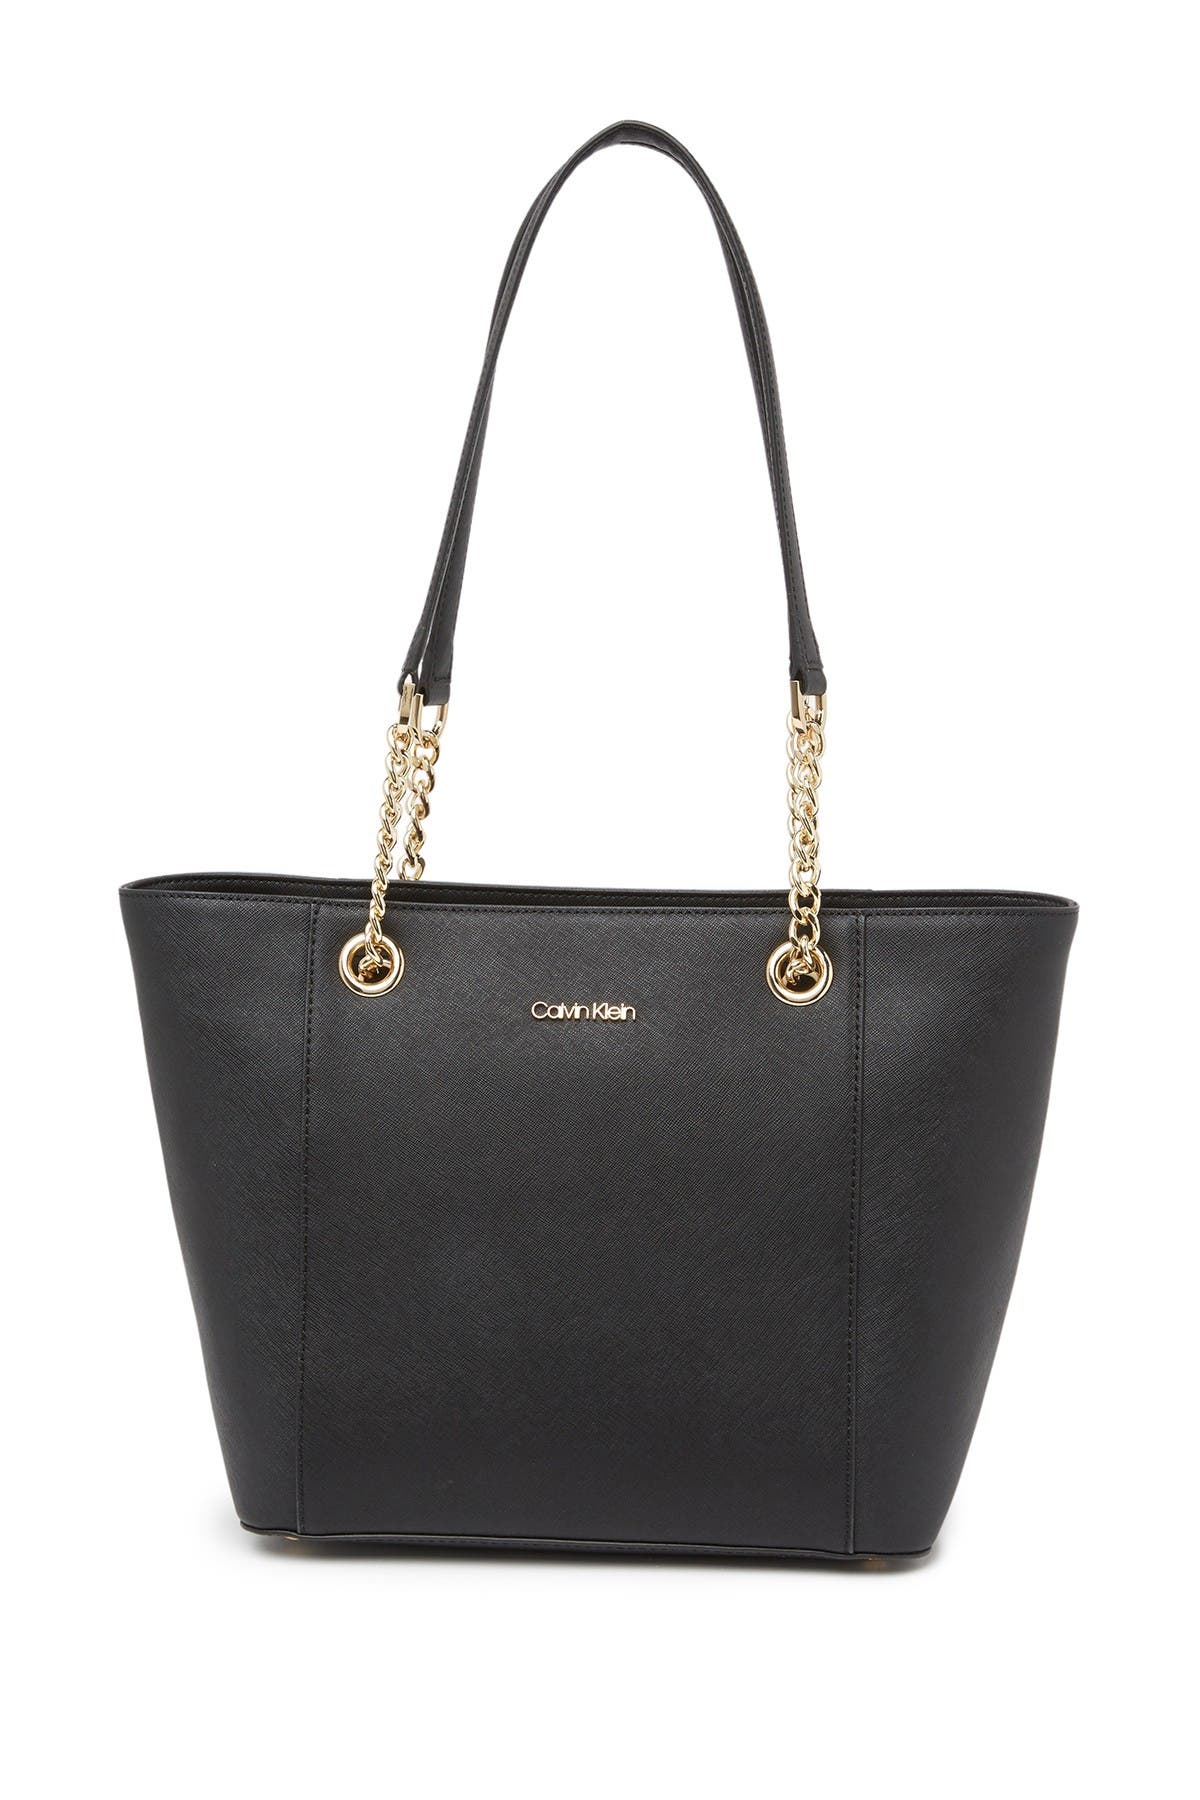 Hayden Key Item Saffiano Leather Tote 